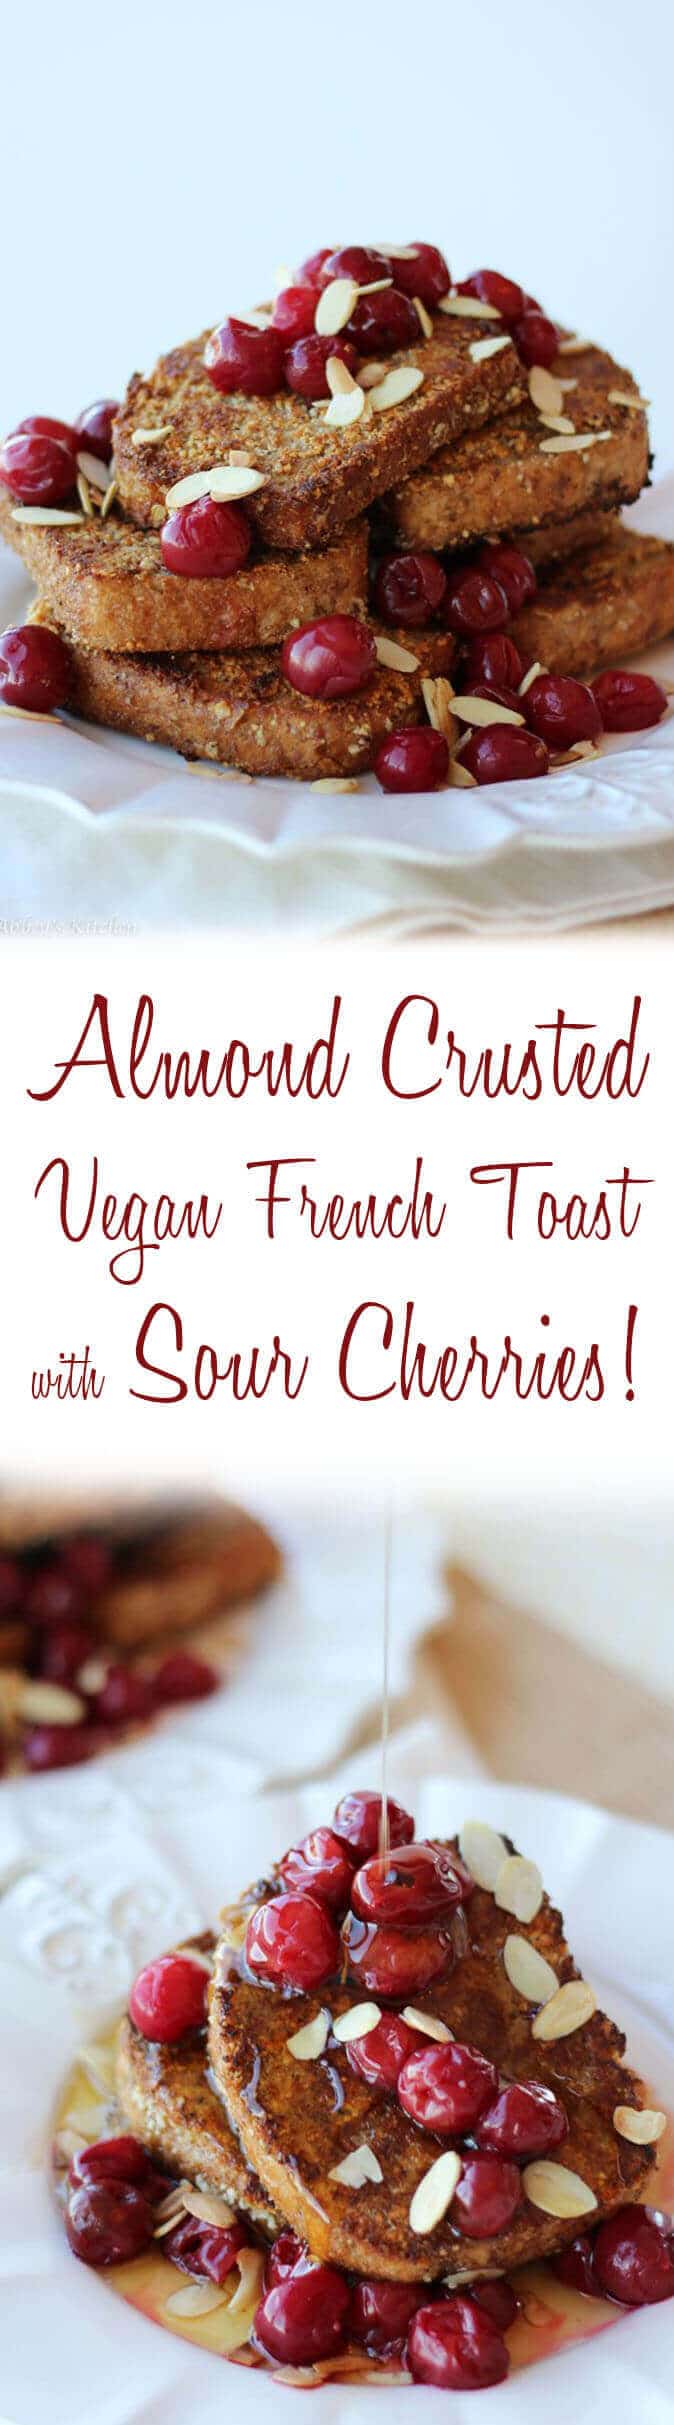 Healthy Vegan French Toast with Almond Crust & Sour Cherry Sauce